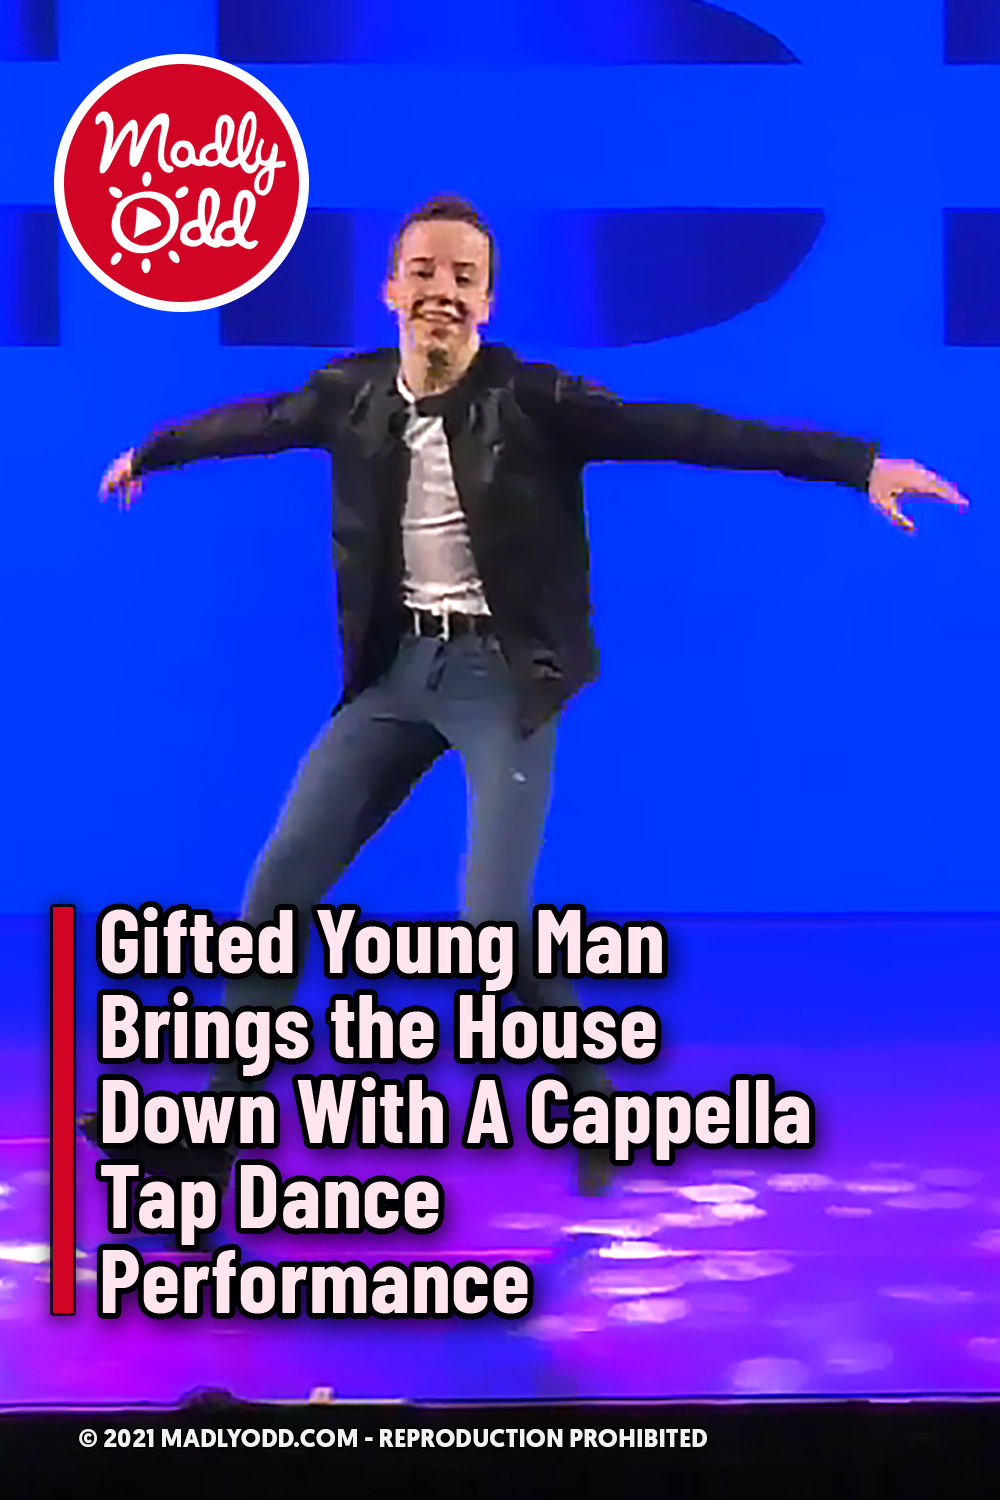 Gifted Young Man Brings the House Down With A Cappella Tap Dance Performance